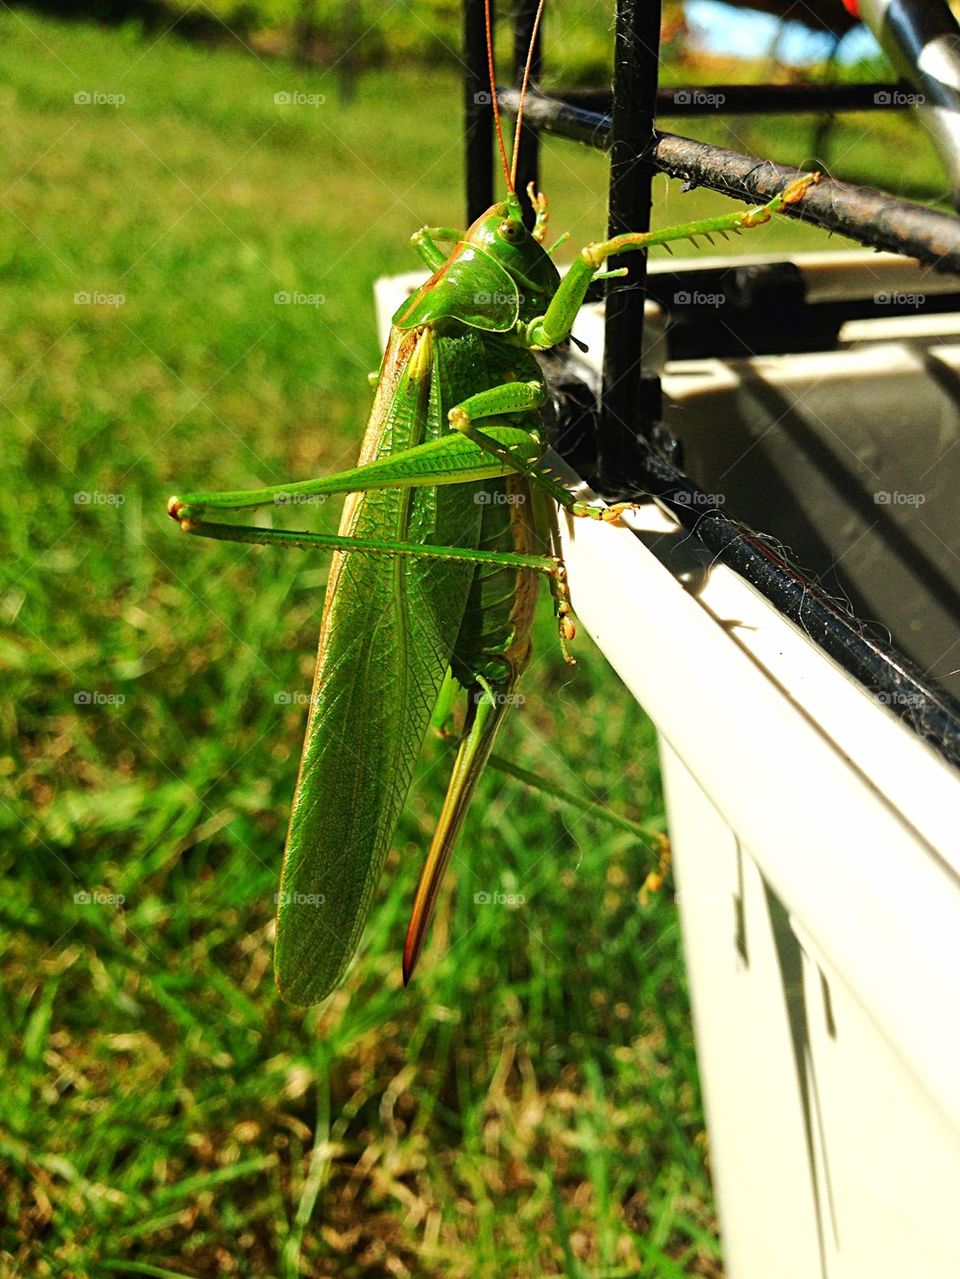 Another giant grasshopper